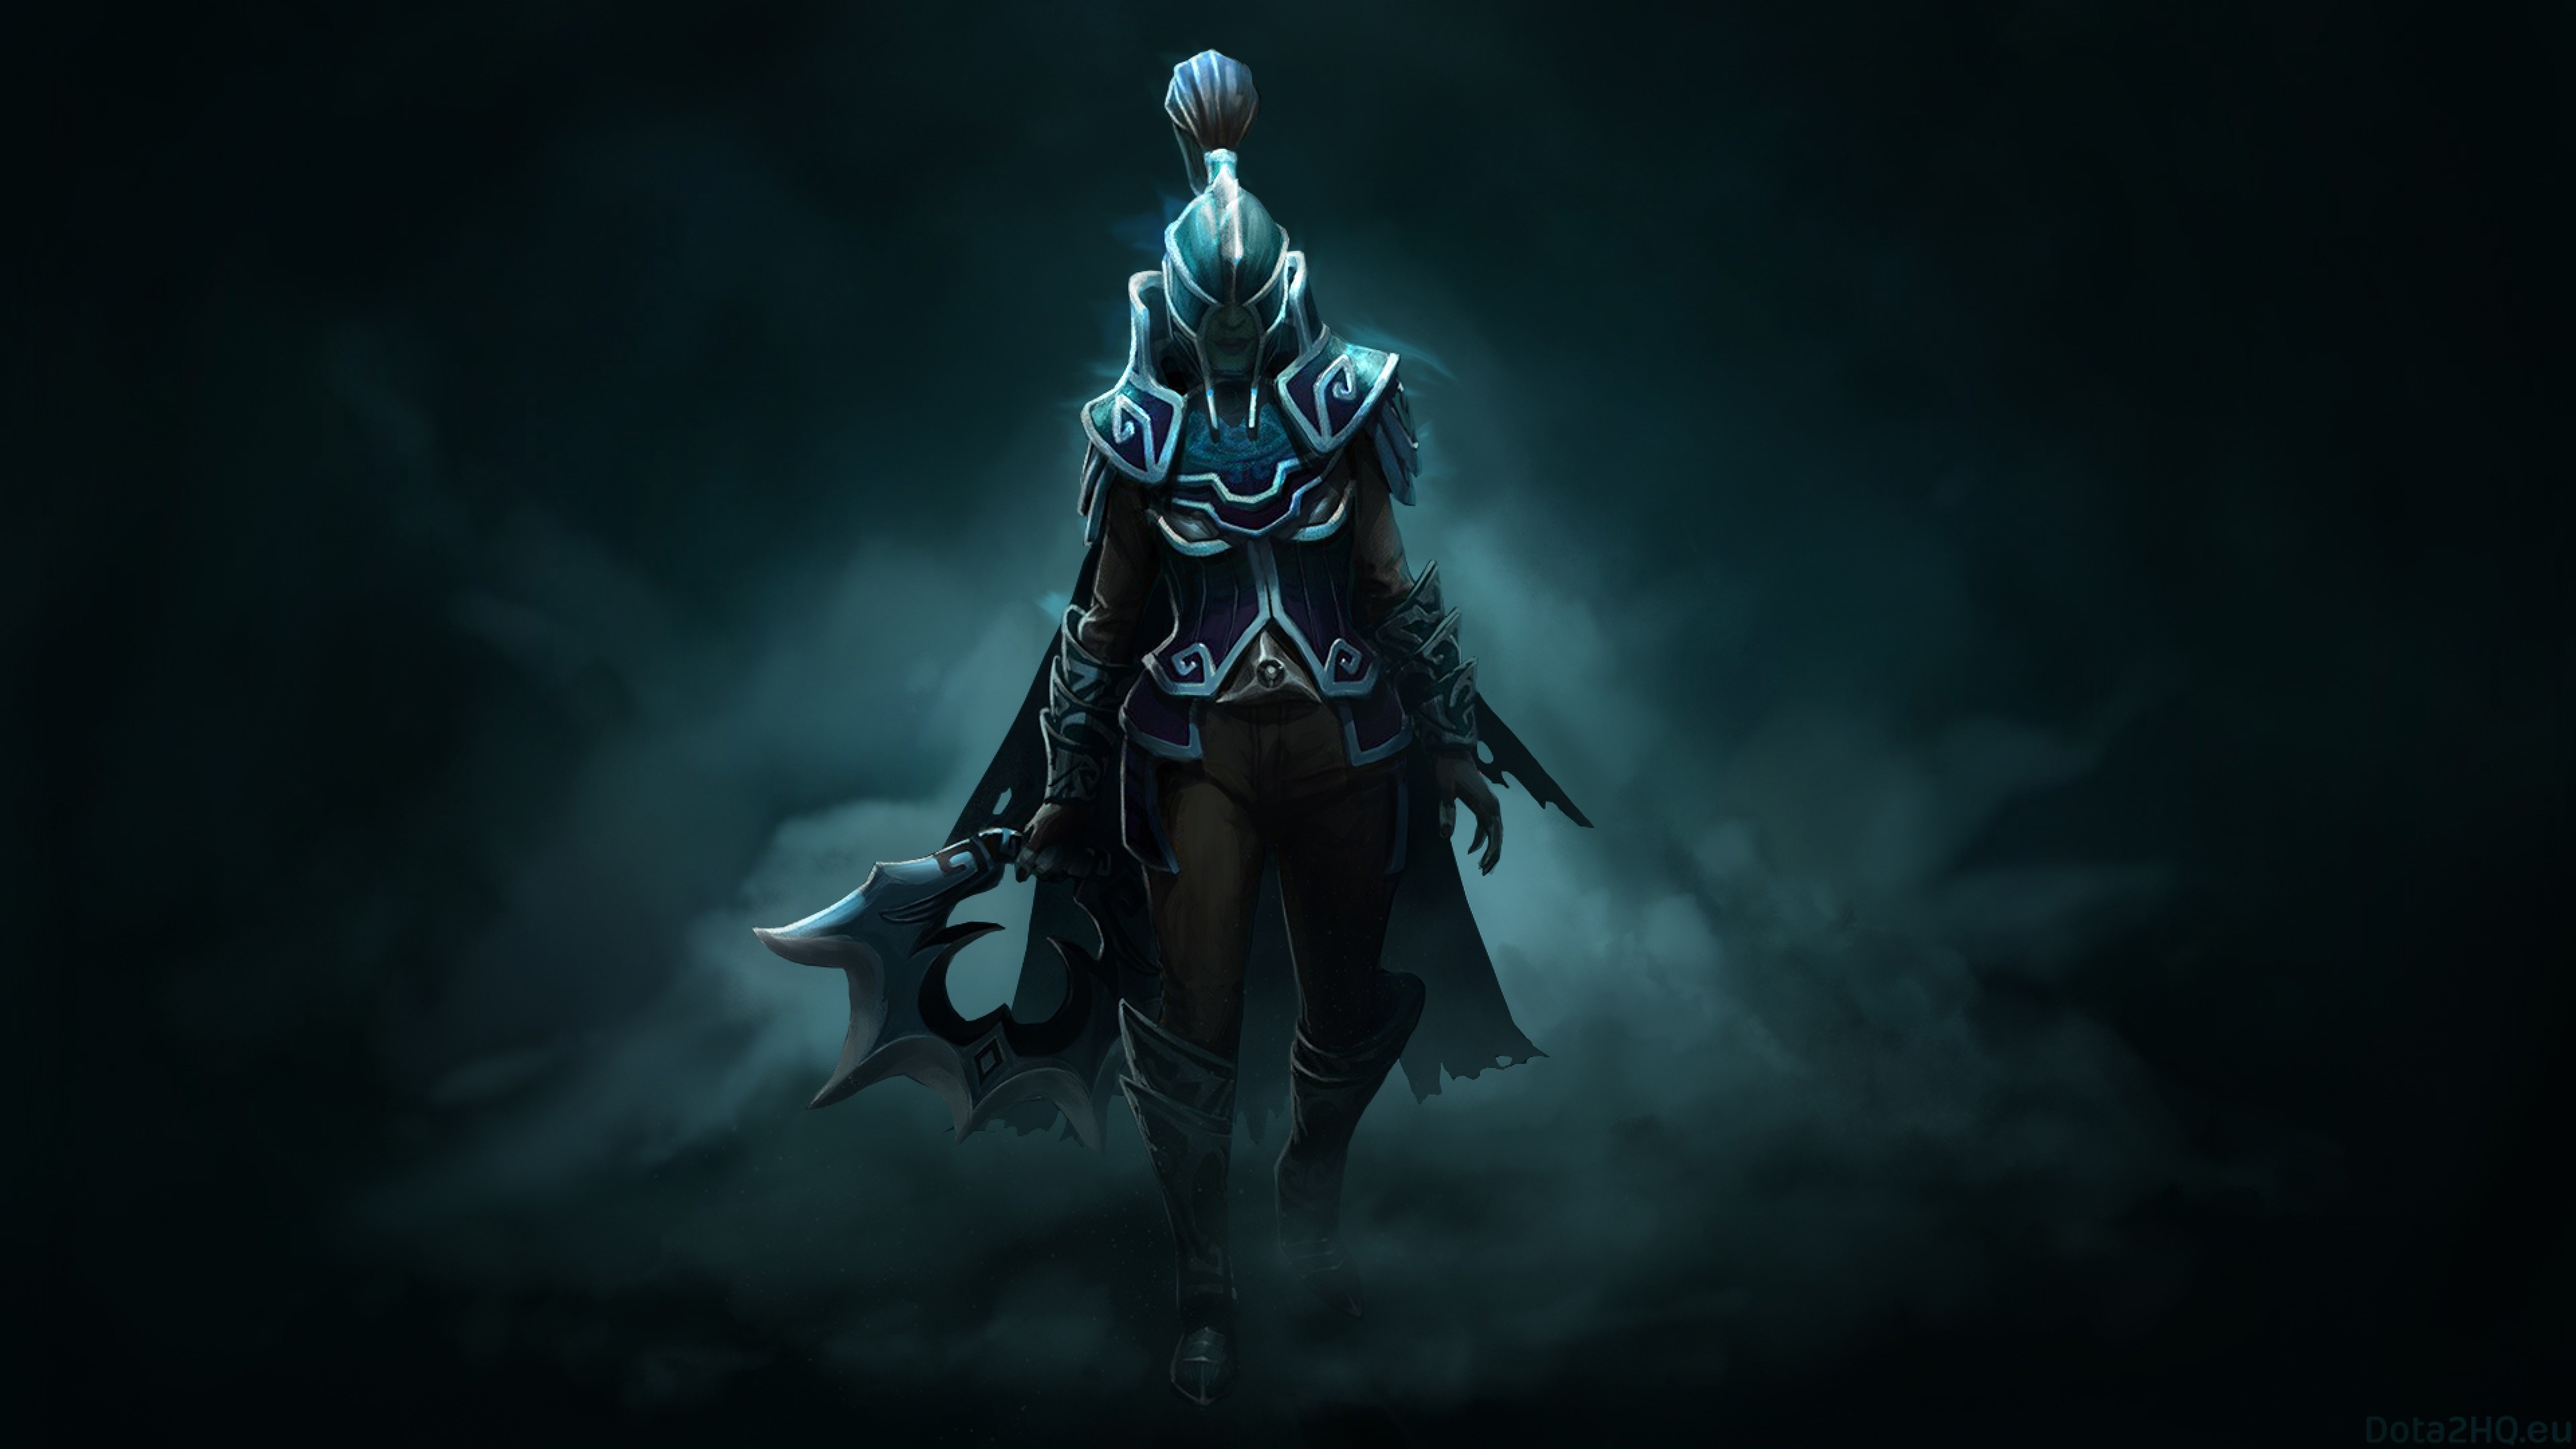 3840x2160 Dota | Dota Images, Pictures, Wallpapers on AHDzBooK